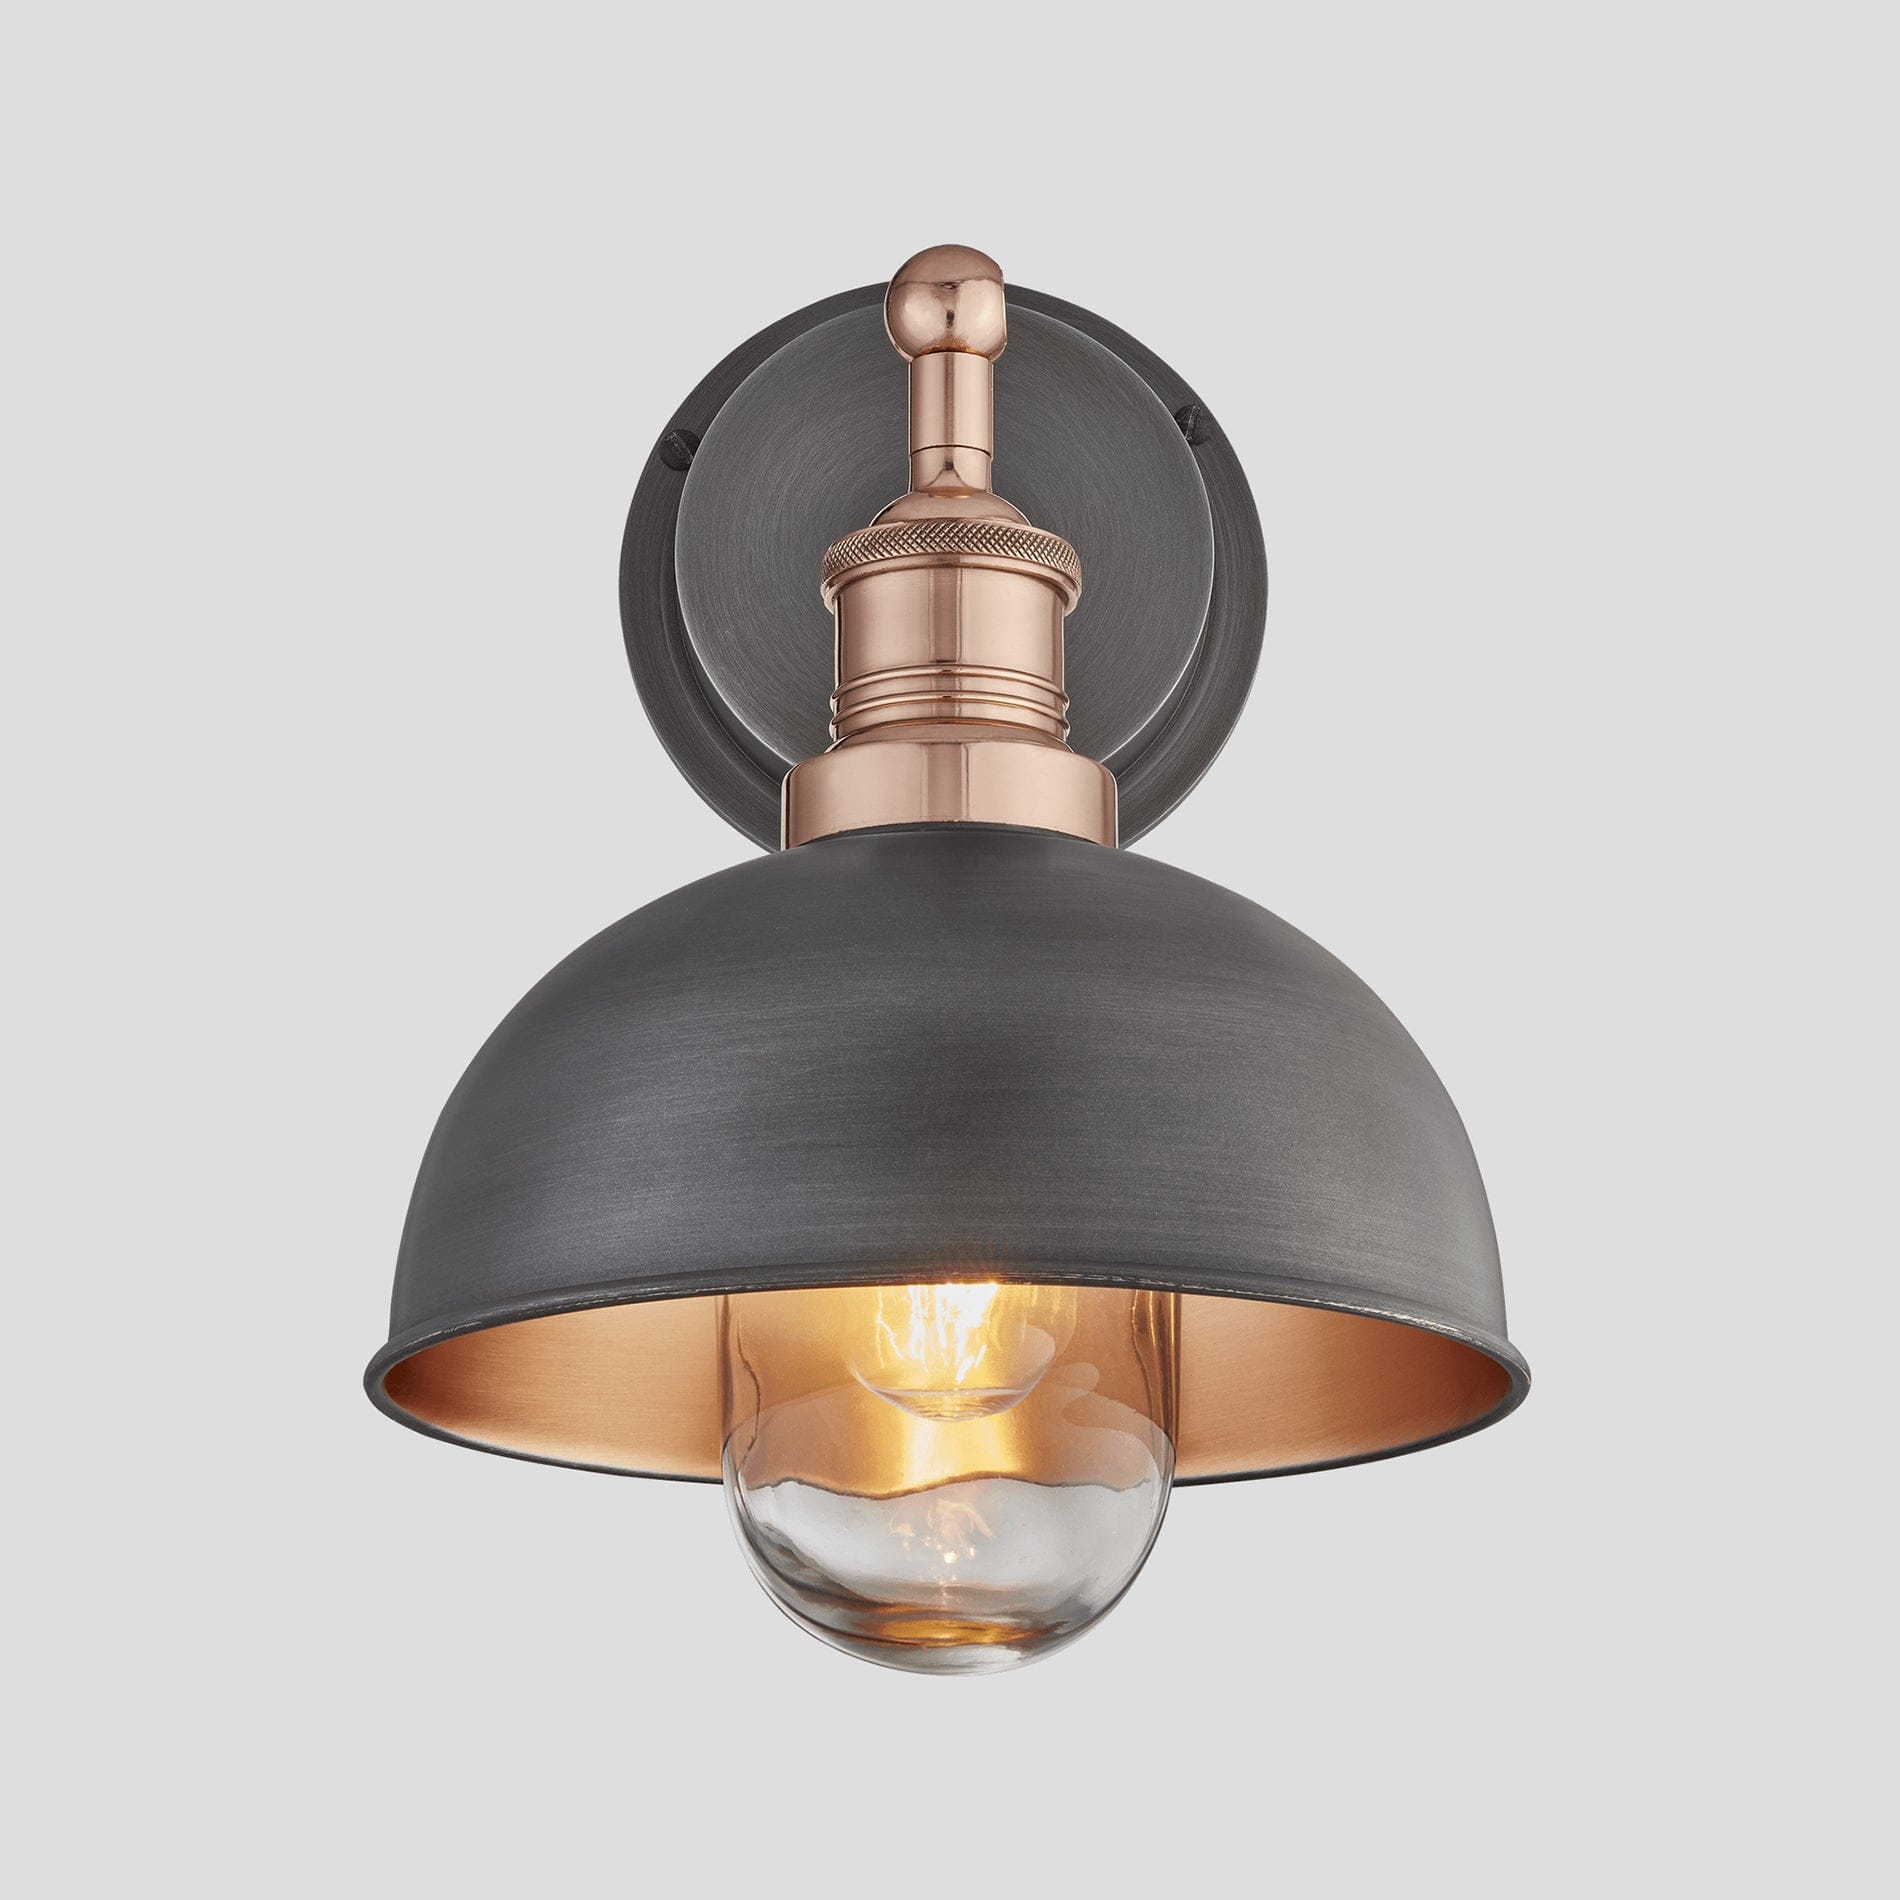 Brooklyn Outdoor & Bathroom Dome Wall Light - 8 Inch - Pewter & Copper Industville BR-IP65-DWL8-CP-CH